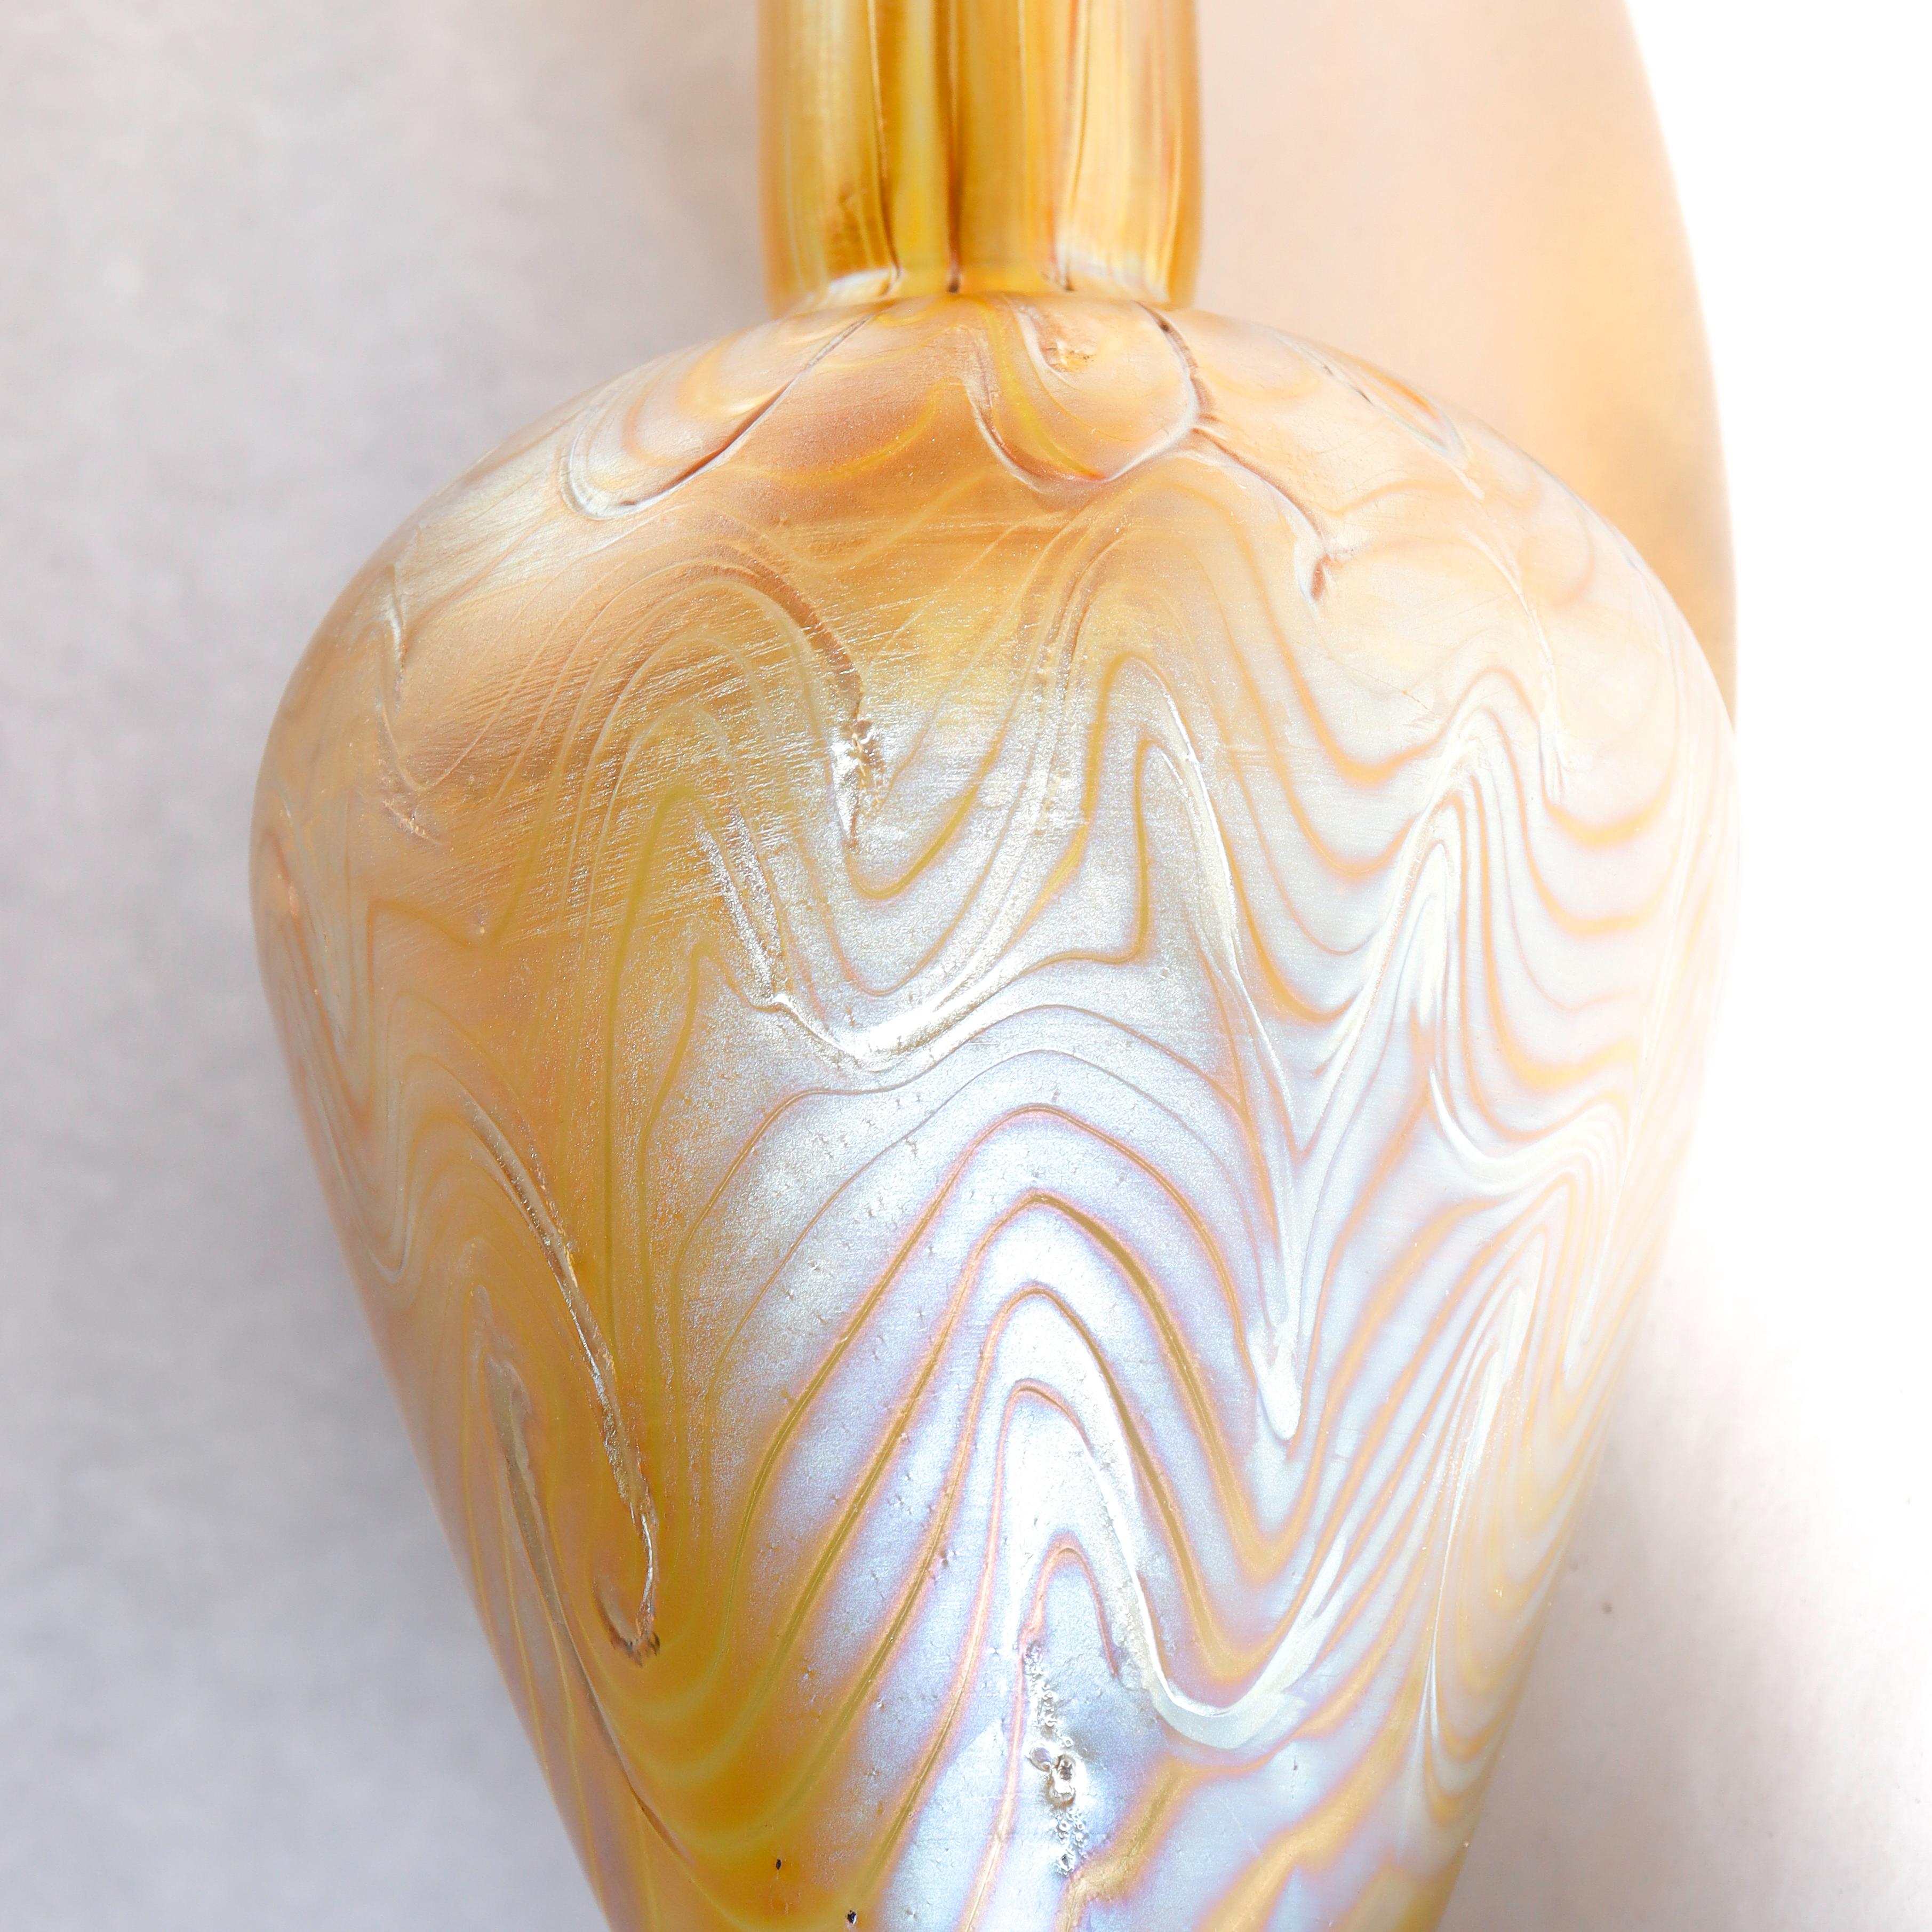 A fine Art Nouveau silver mounted art glass vase.

Comprising a Loetz Phaenomen glass body in yellow with a silvery-blue iridescence and an Art Nouveau hand hammered Martelé type silver mounts by the Hartford Sterling Company of Philadelphia, PA.